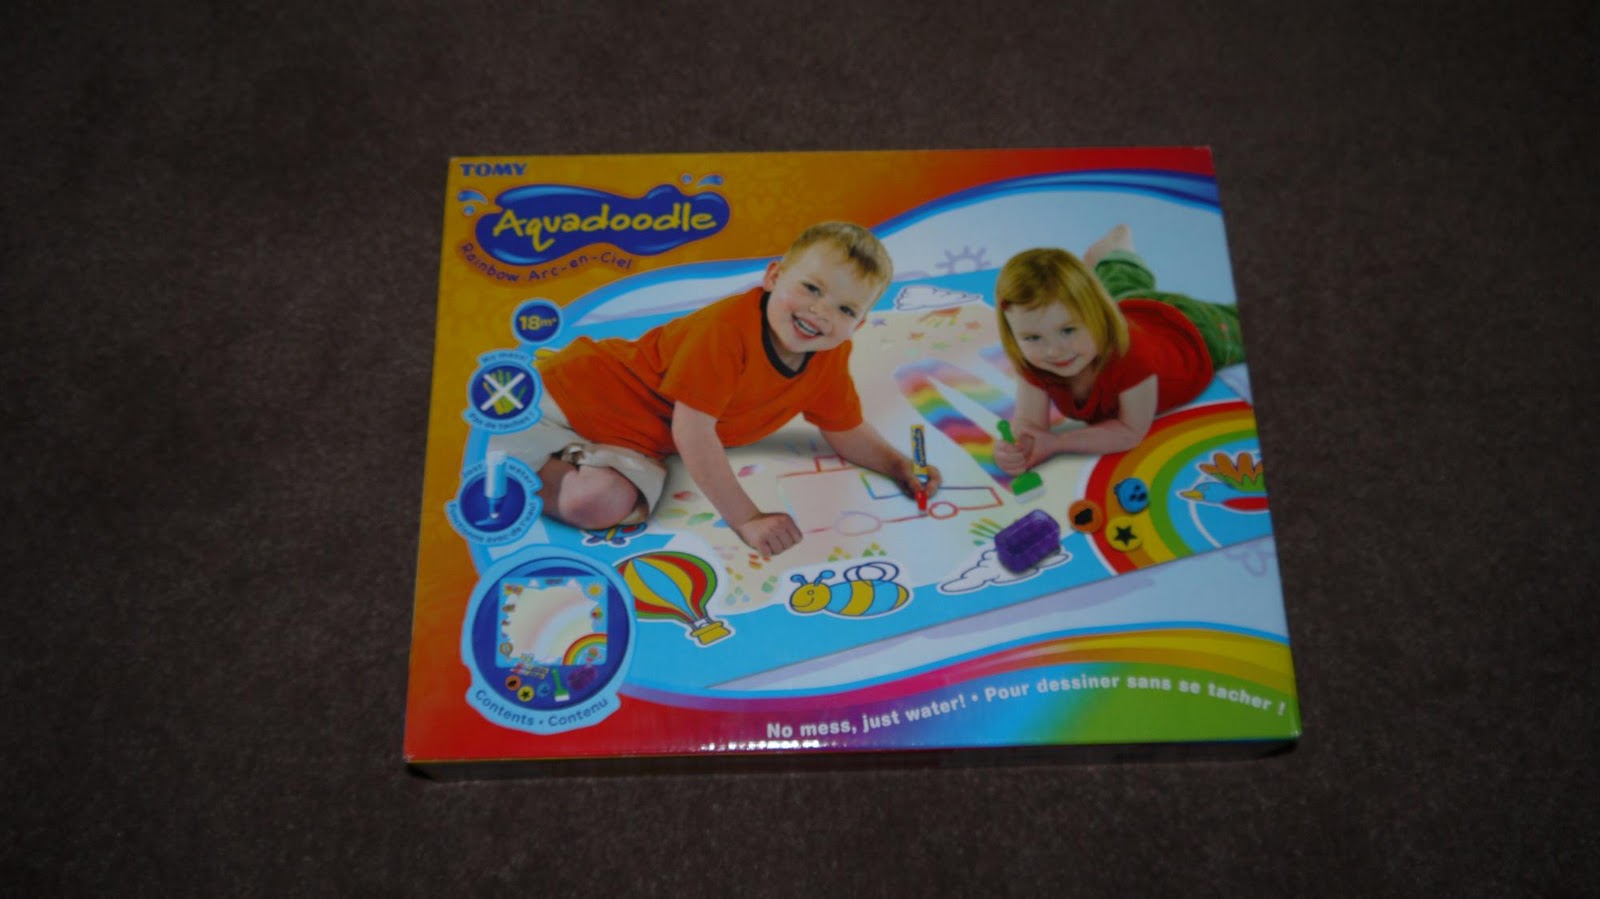 Tomy Aquadoodle - Parenting Without Tears